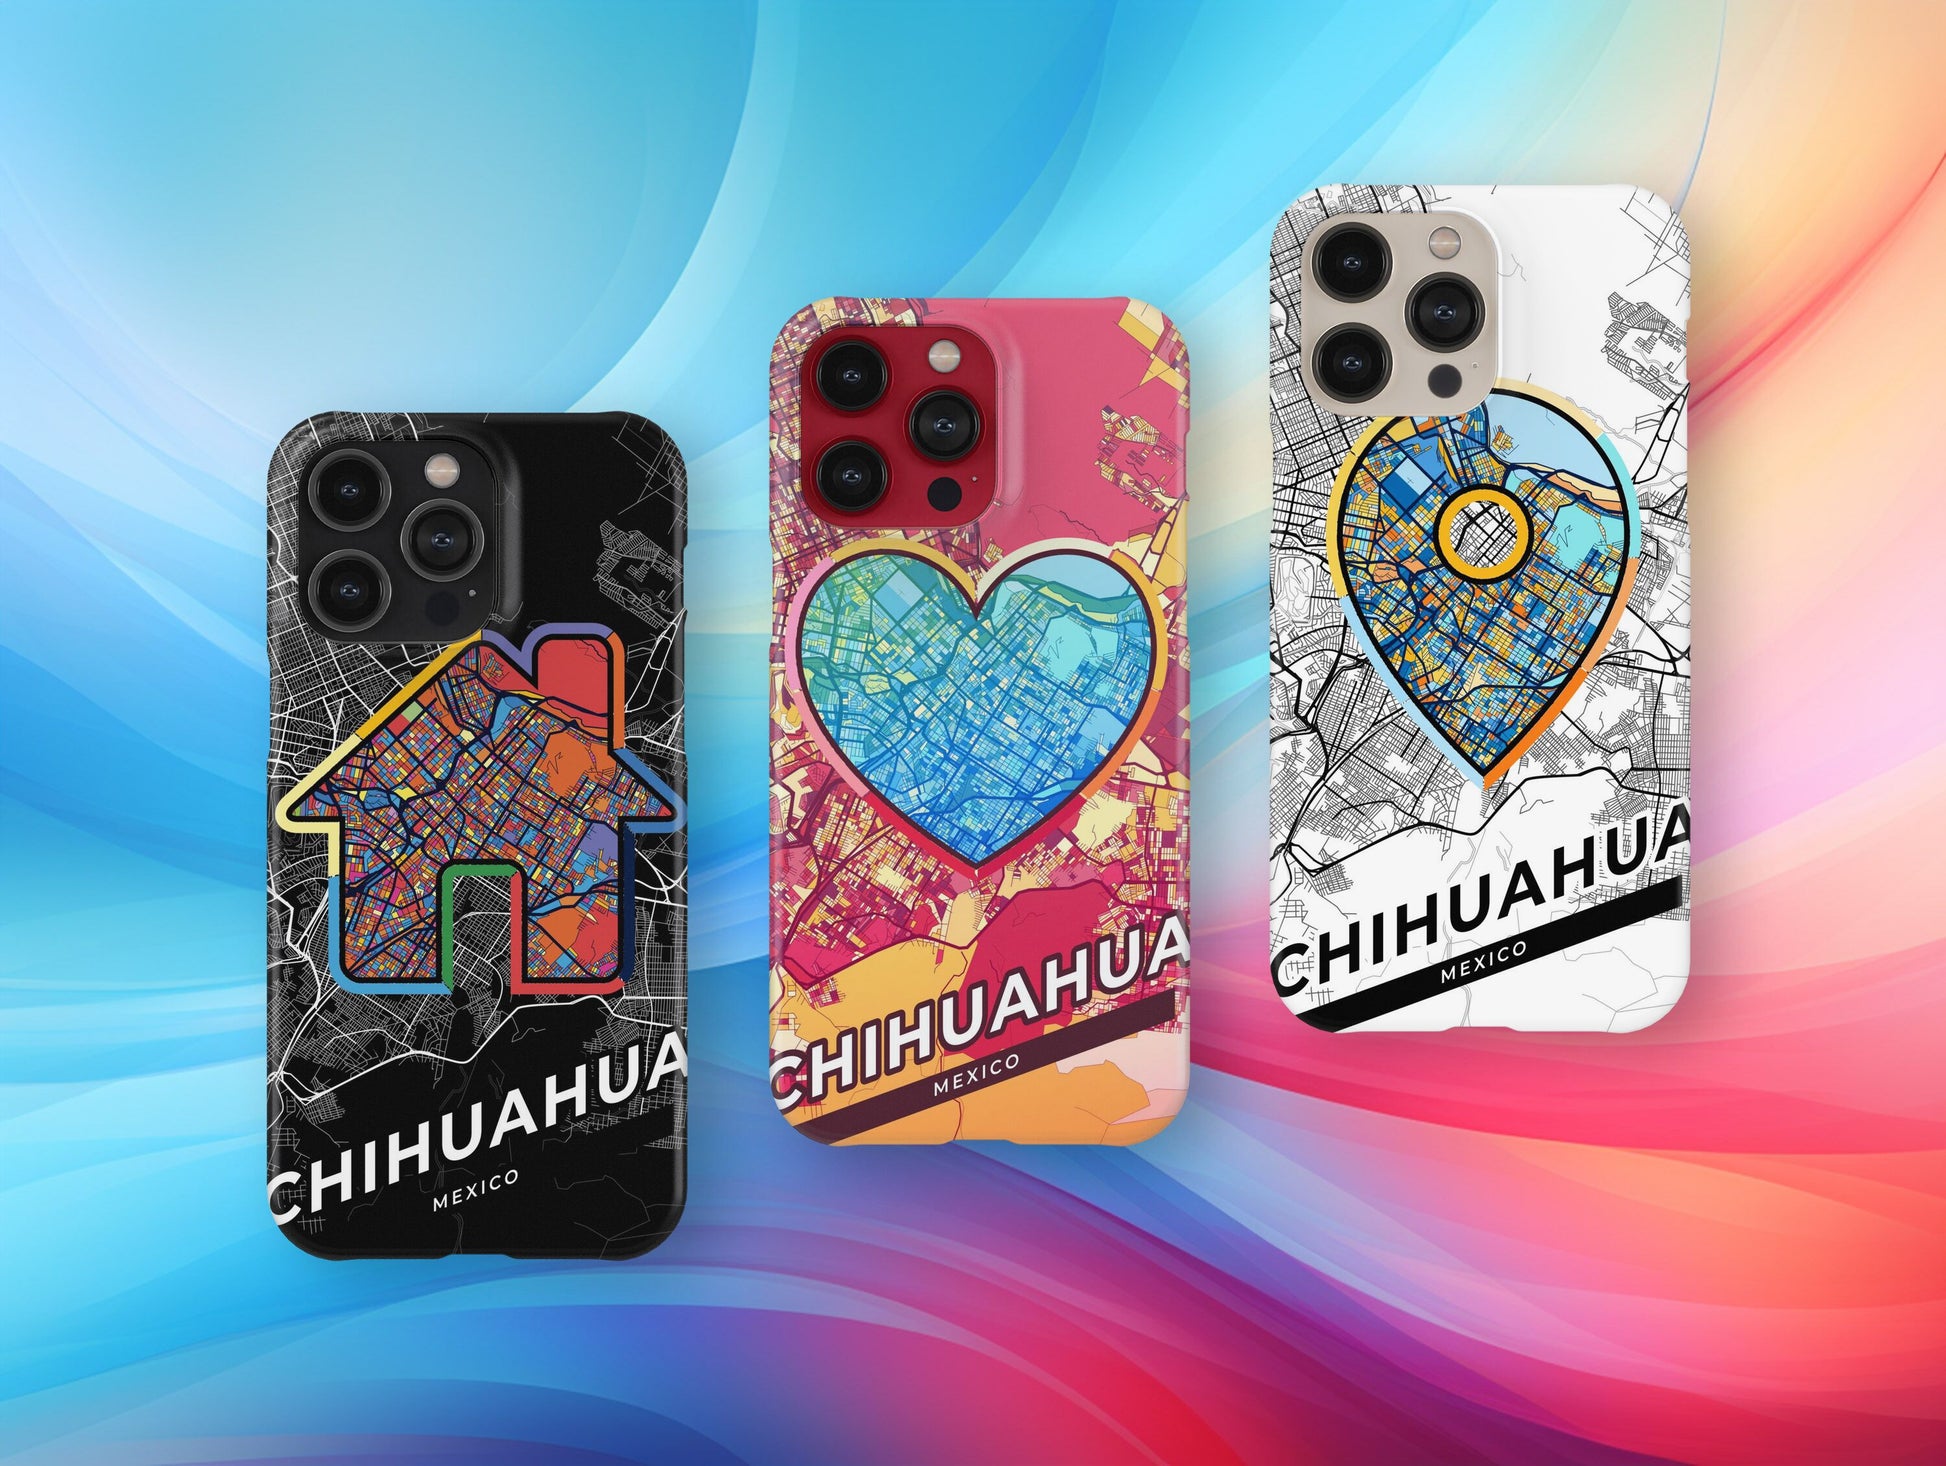 Chihuahua Mexico slim phone case with colorful icon. Birthday, wedding or housewarming gift. Couple match cases.